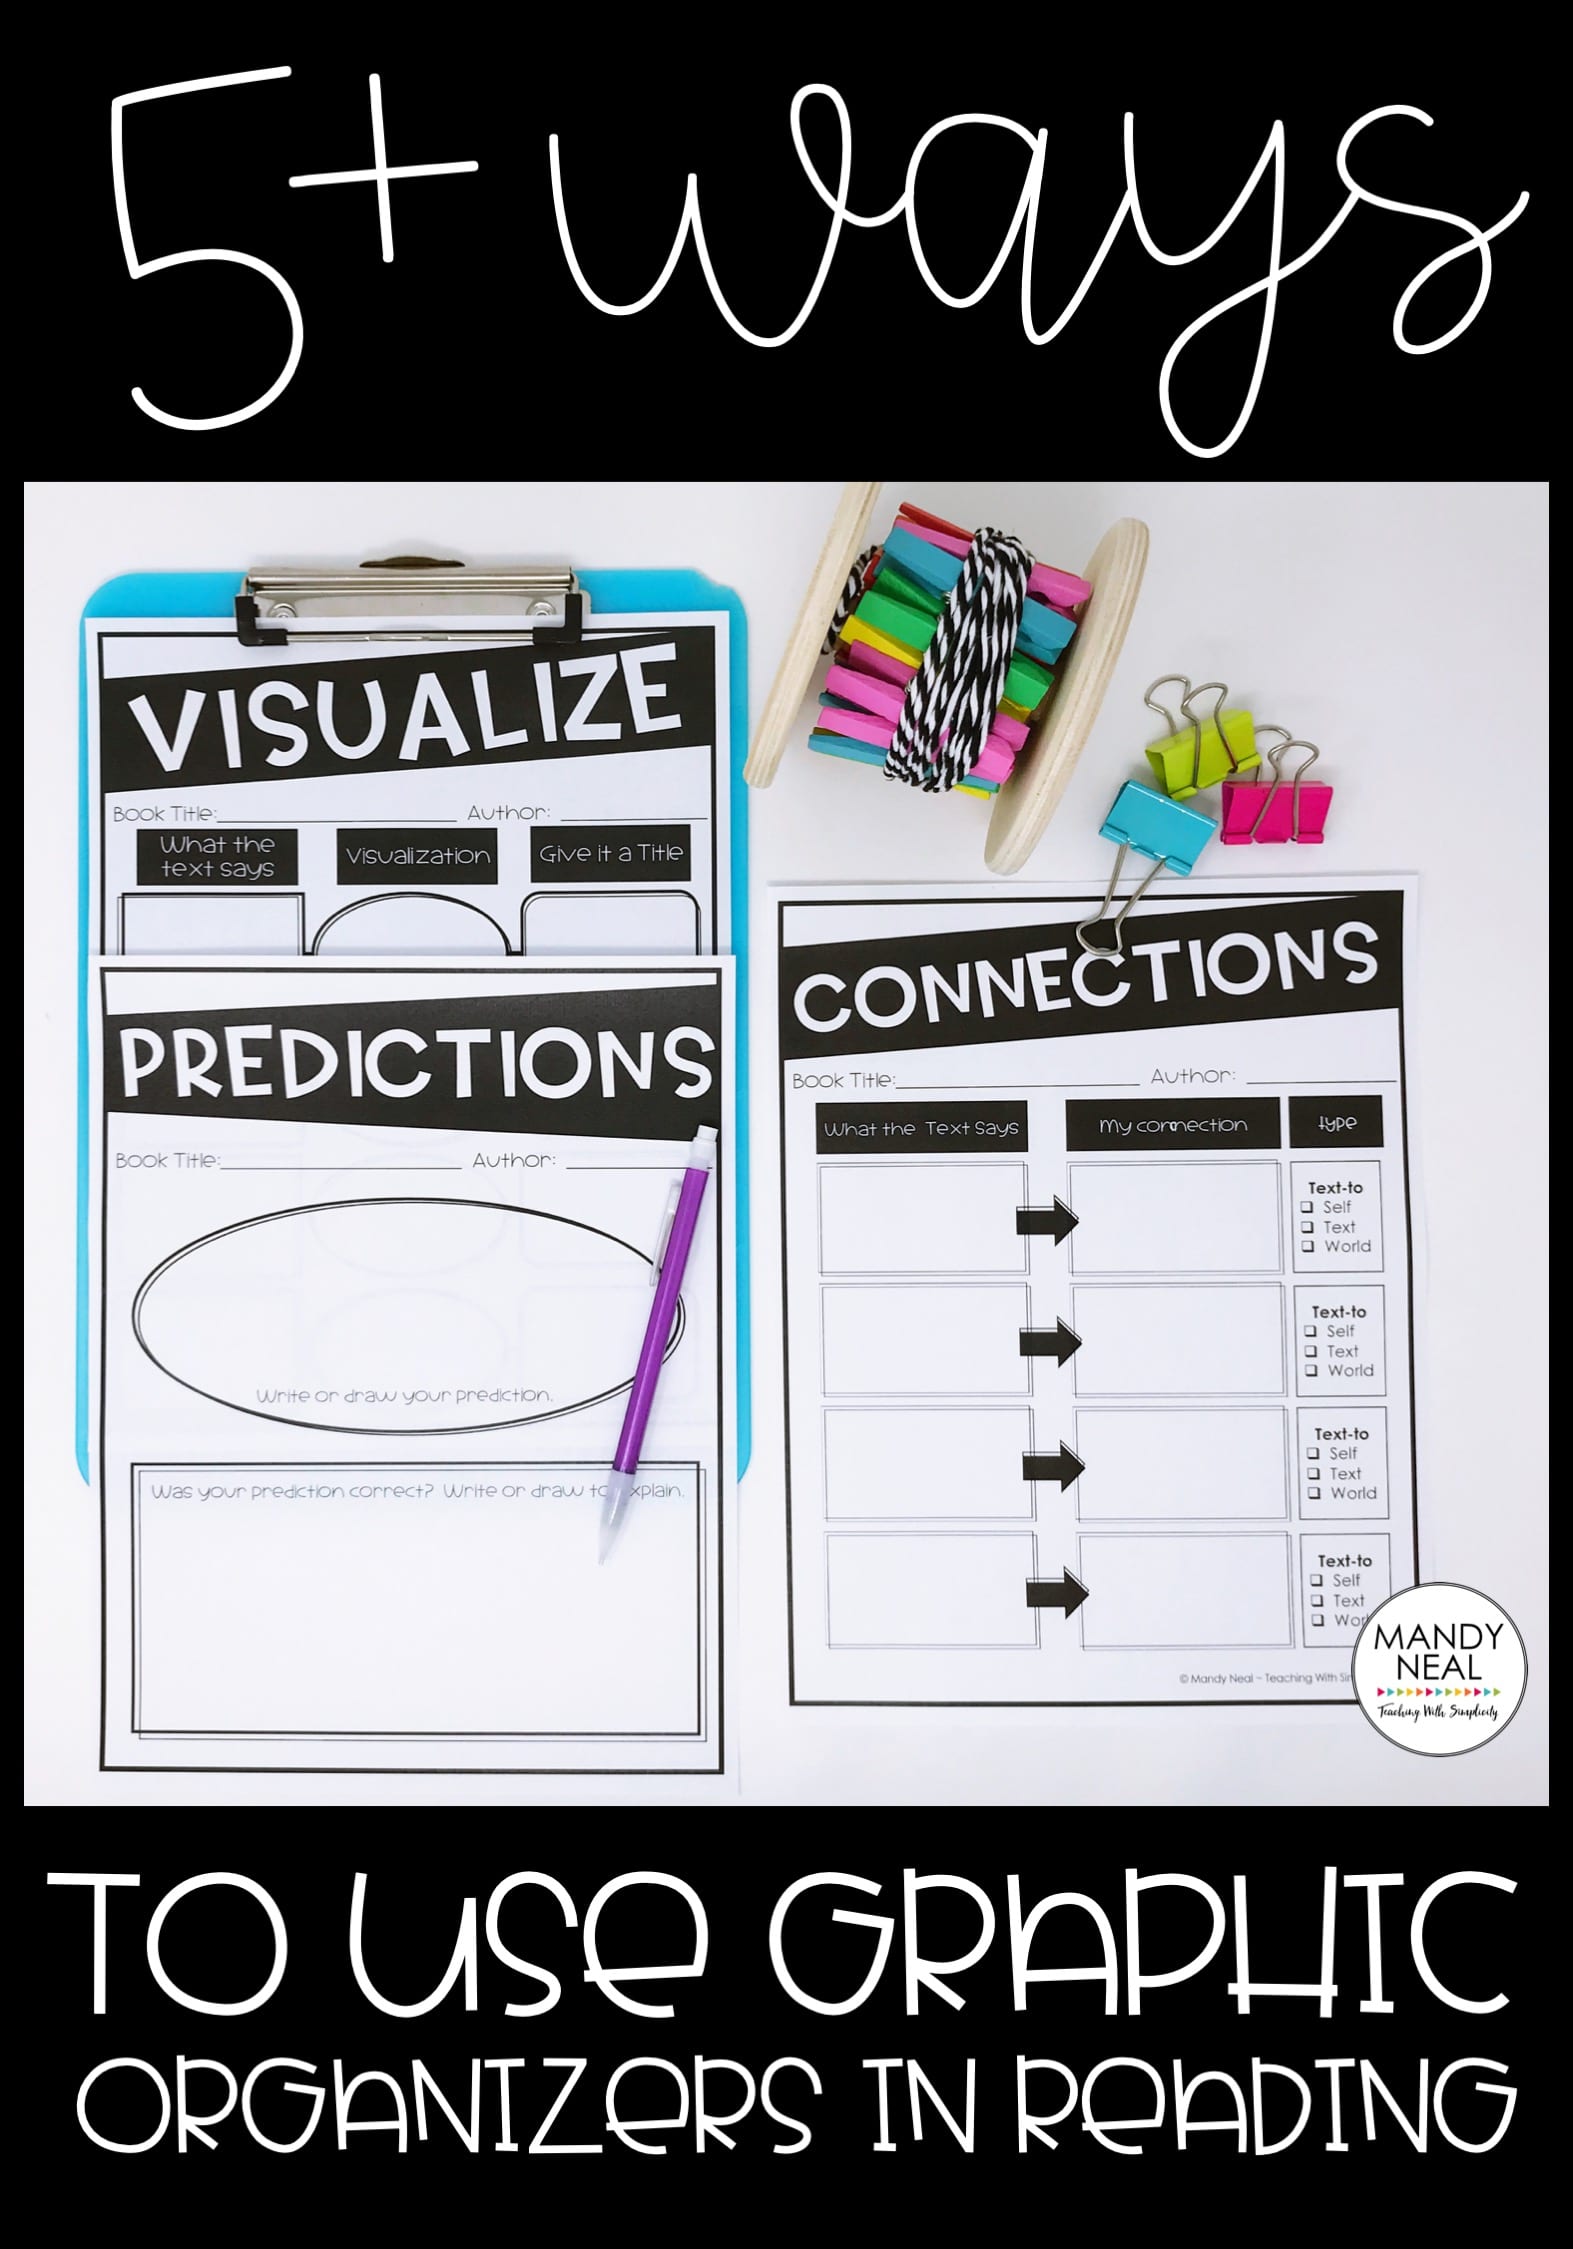 , 5 + Ways to Use Graphic Organizers in Reading